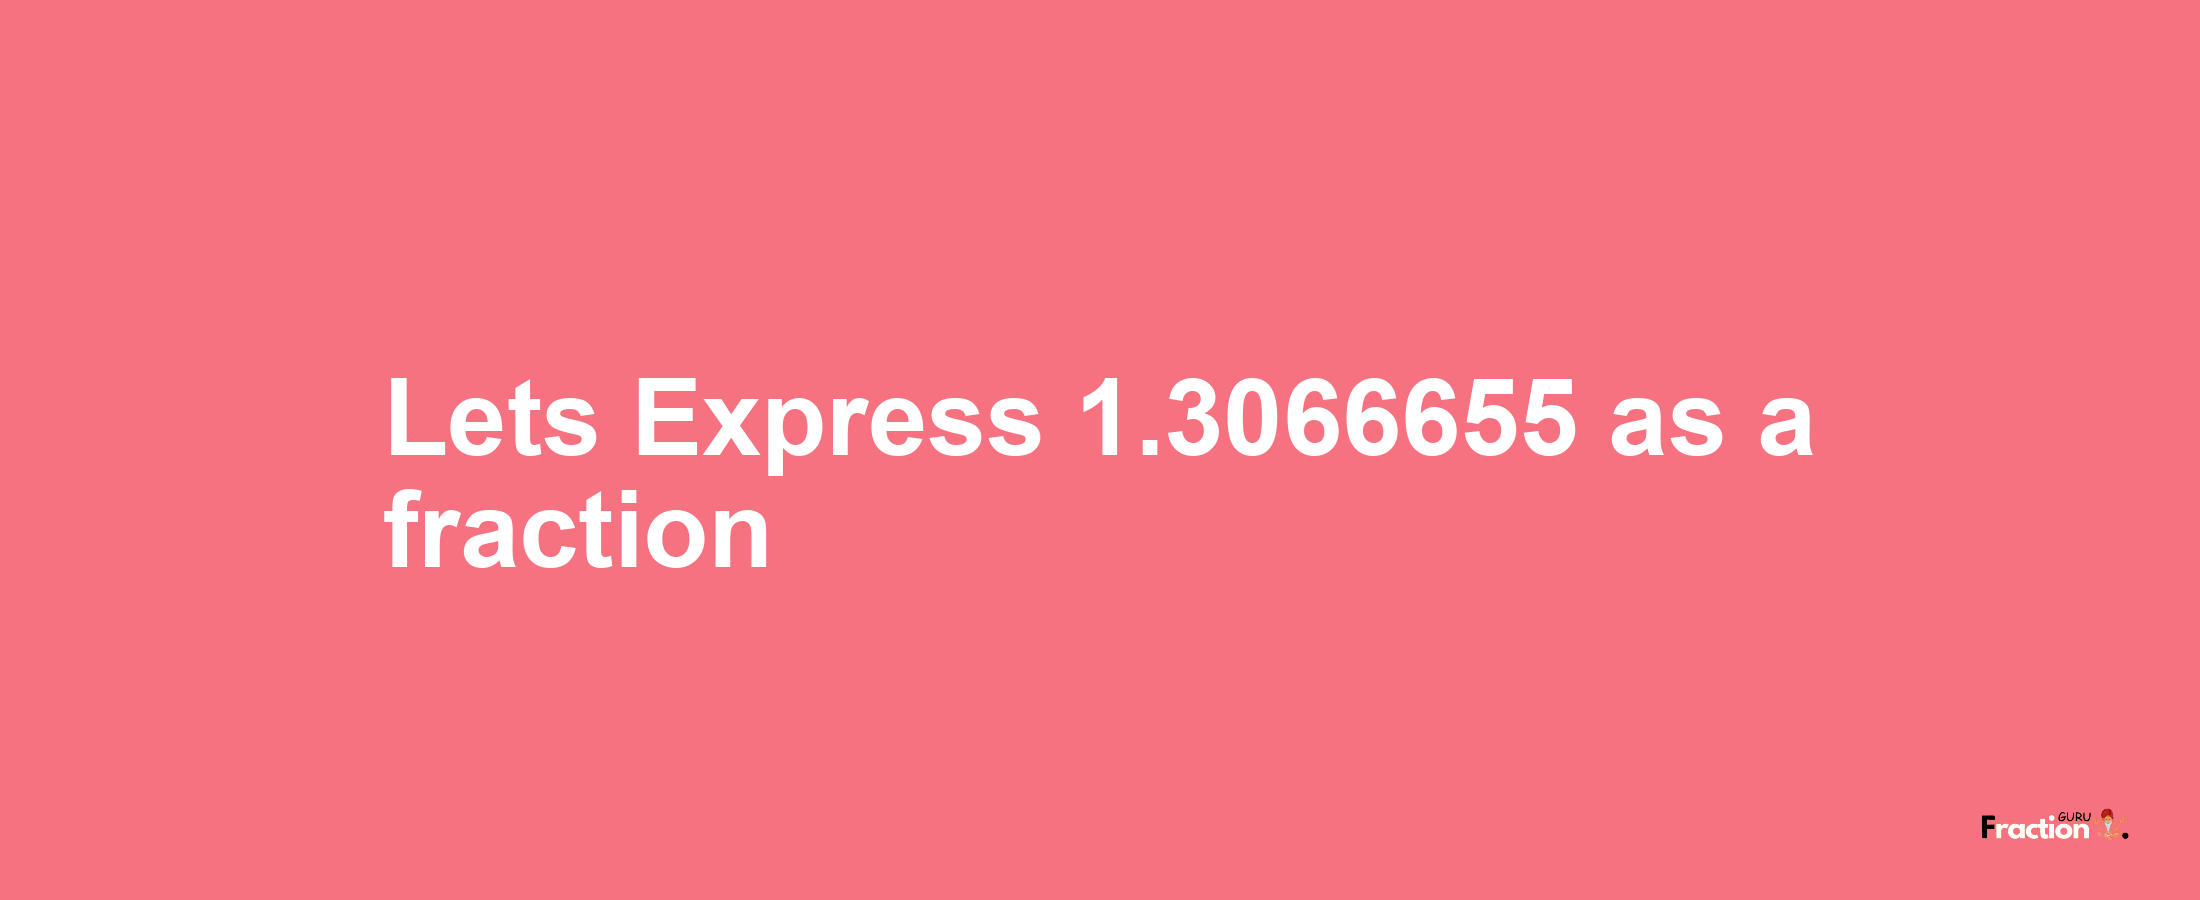 Lets Express 1.3066655 as afraction